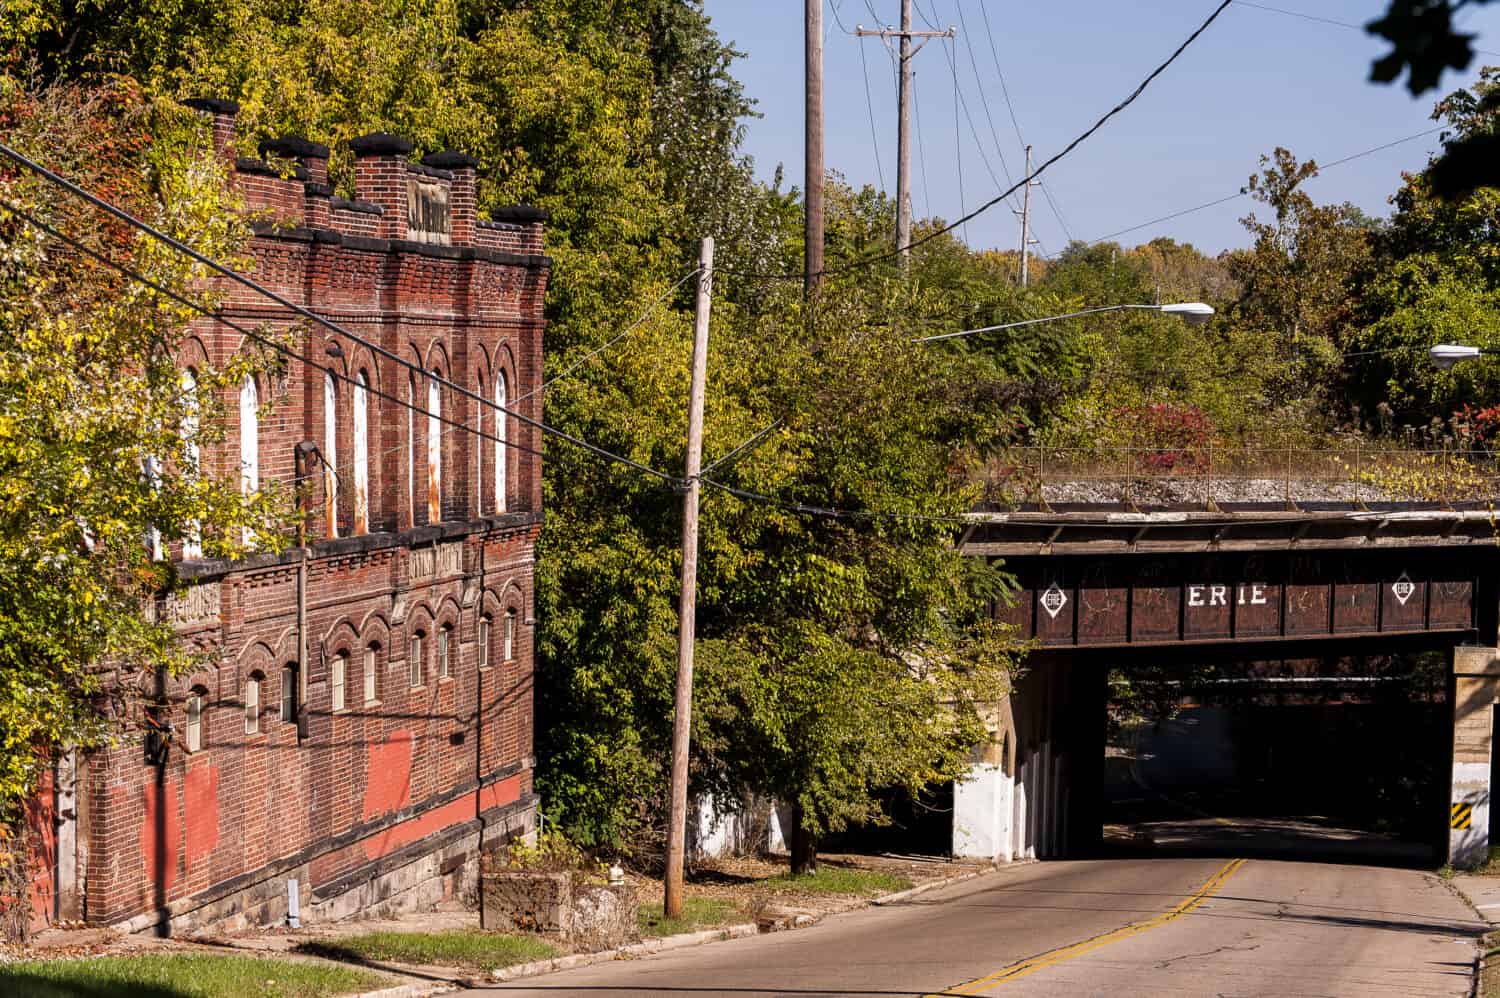 A historic but abandoned brewery with buff red brick with arch detailing lies along a derelict street.